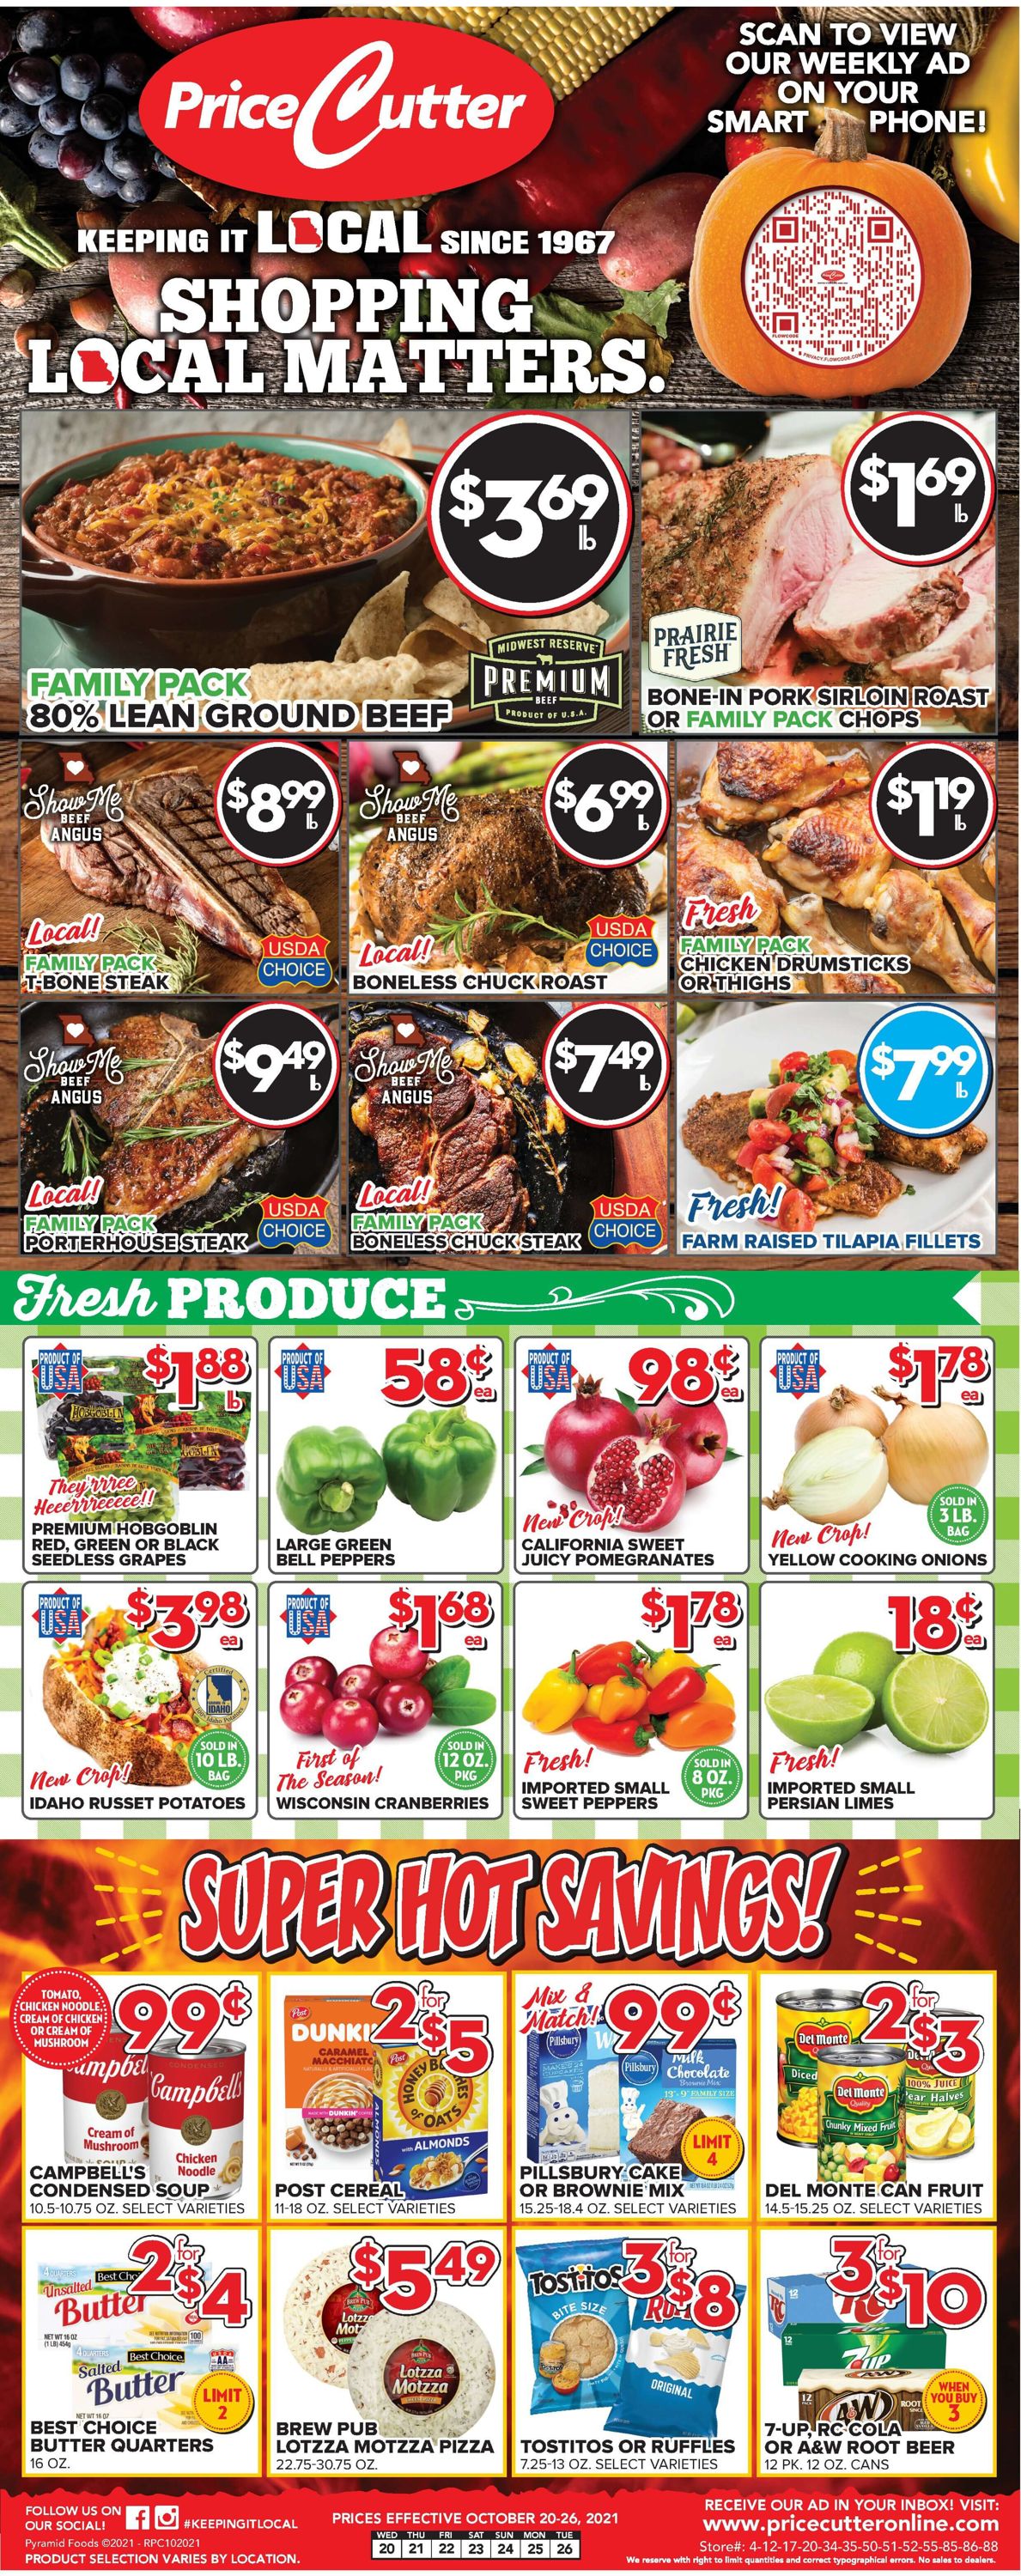 Price Cutter Weekly Ad Circular - valid 10/20-10/26/2021